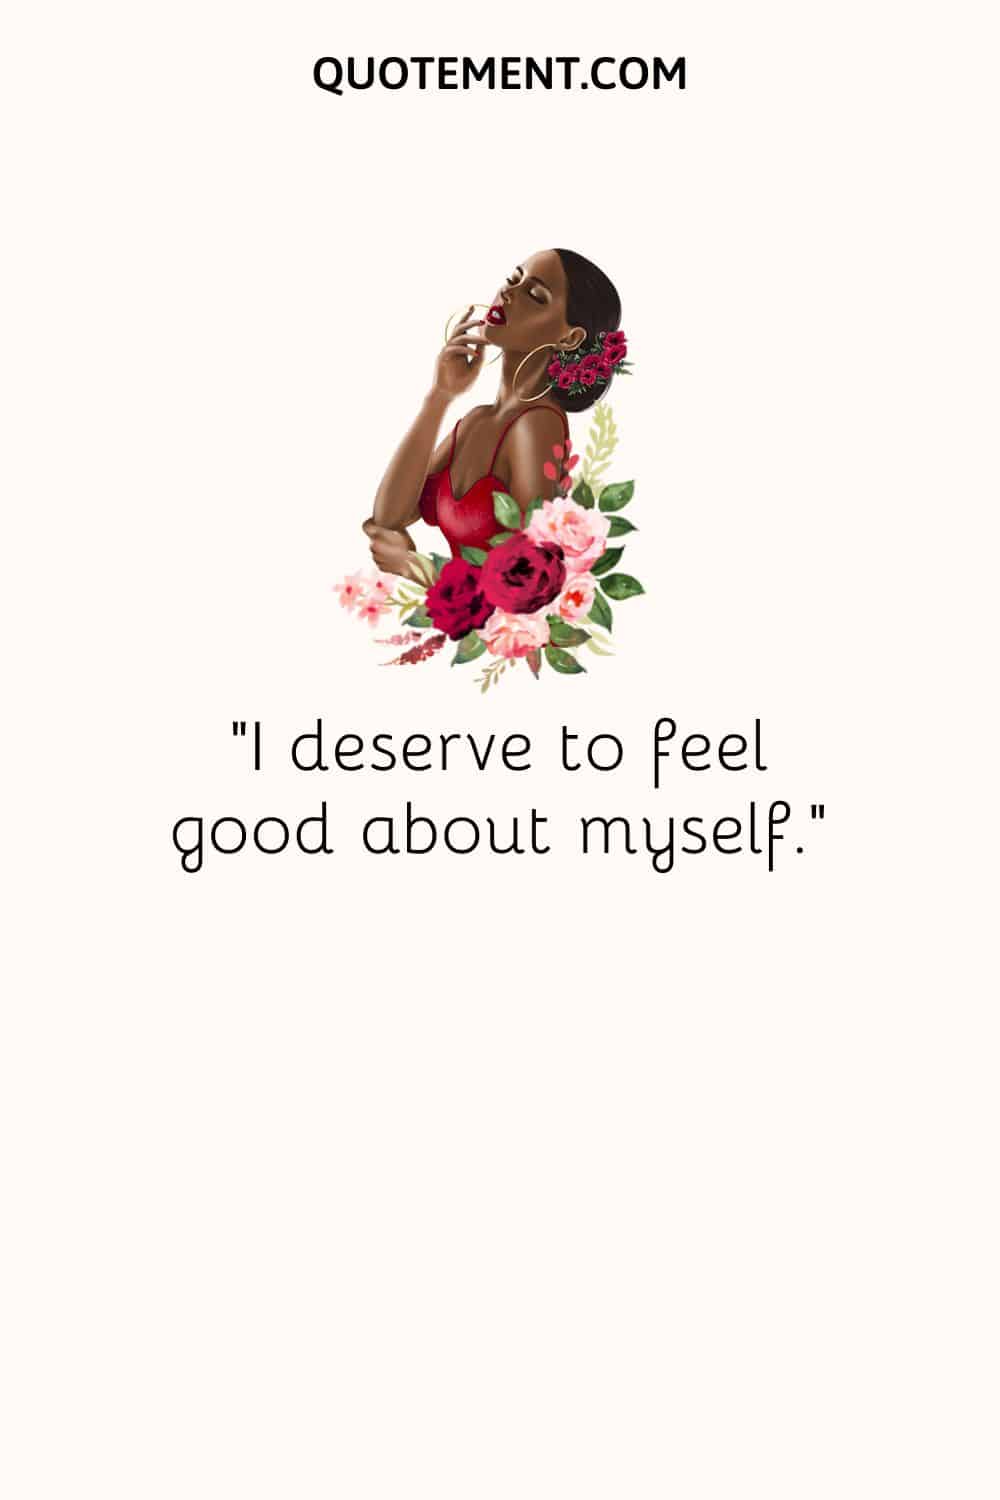 roses and black woman image representing self love affirmation